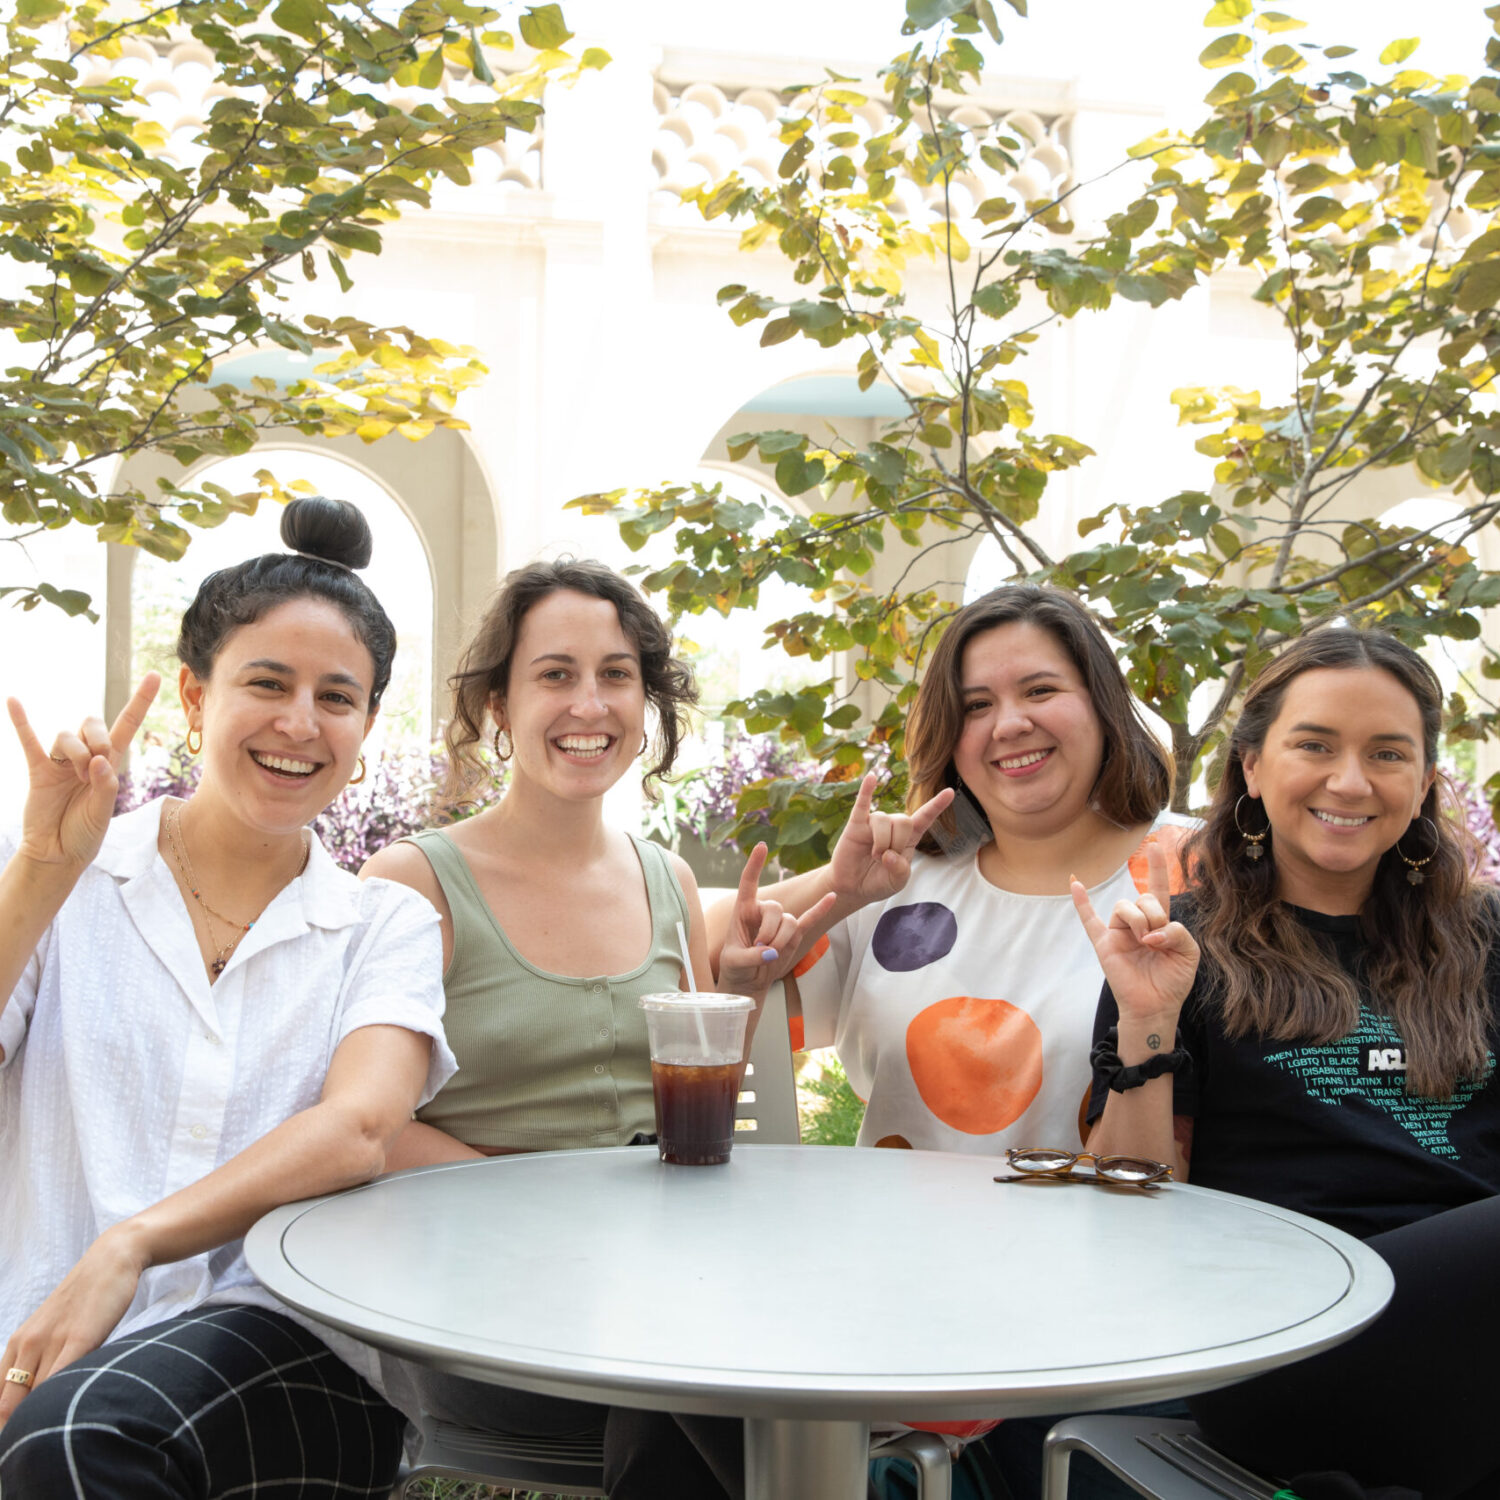 four women sitting at table, smiling and holding up hook 'em hand signs